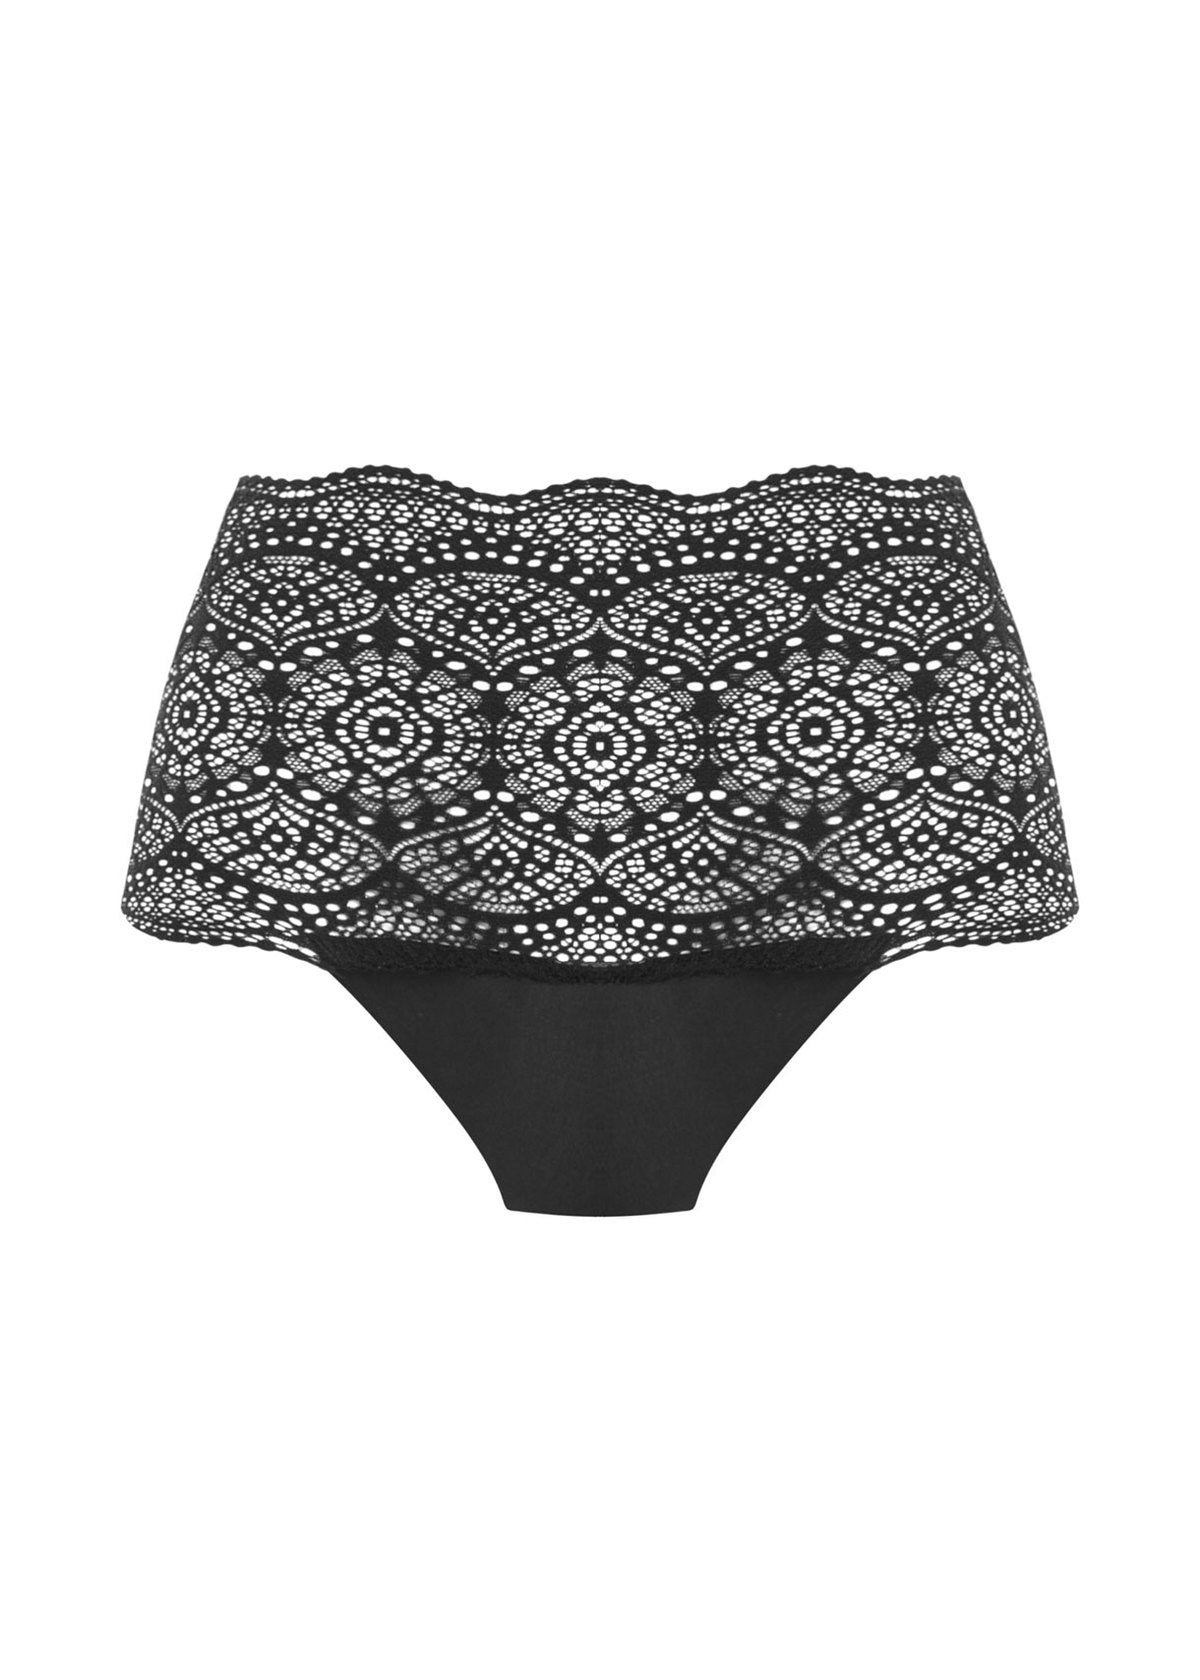 Lace Ease Invisible Stretch Full Brief in Black front view product image